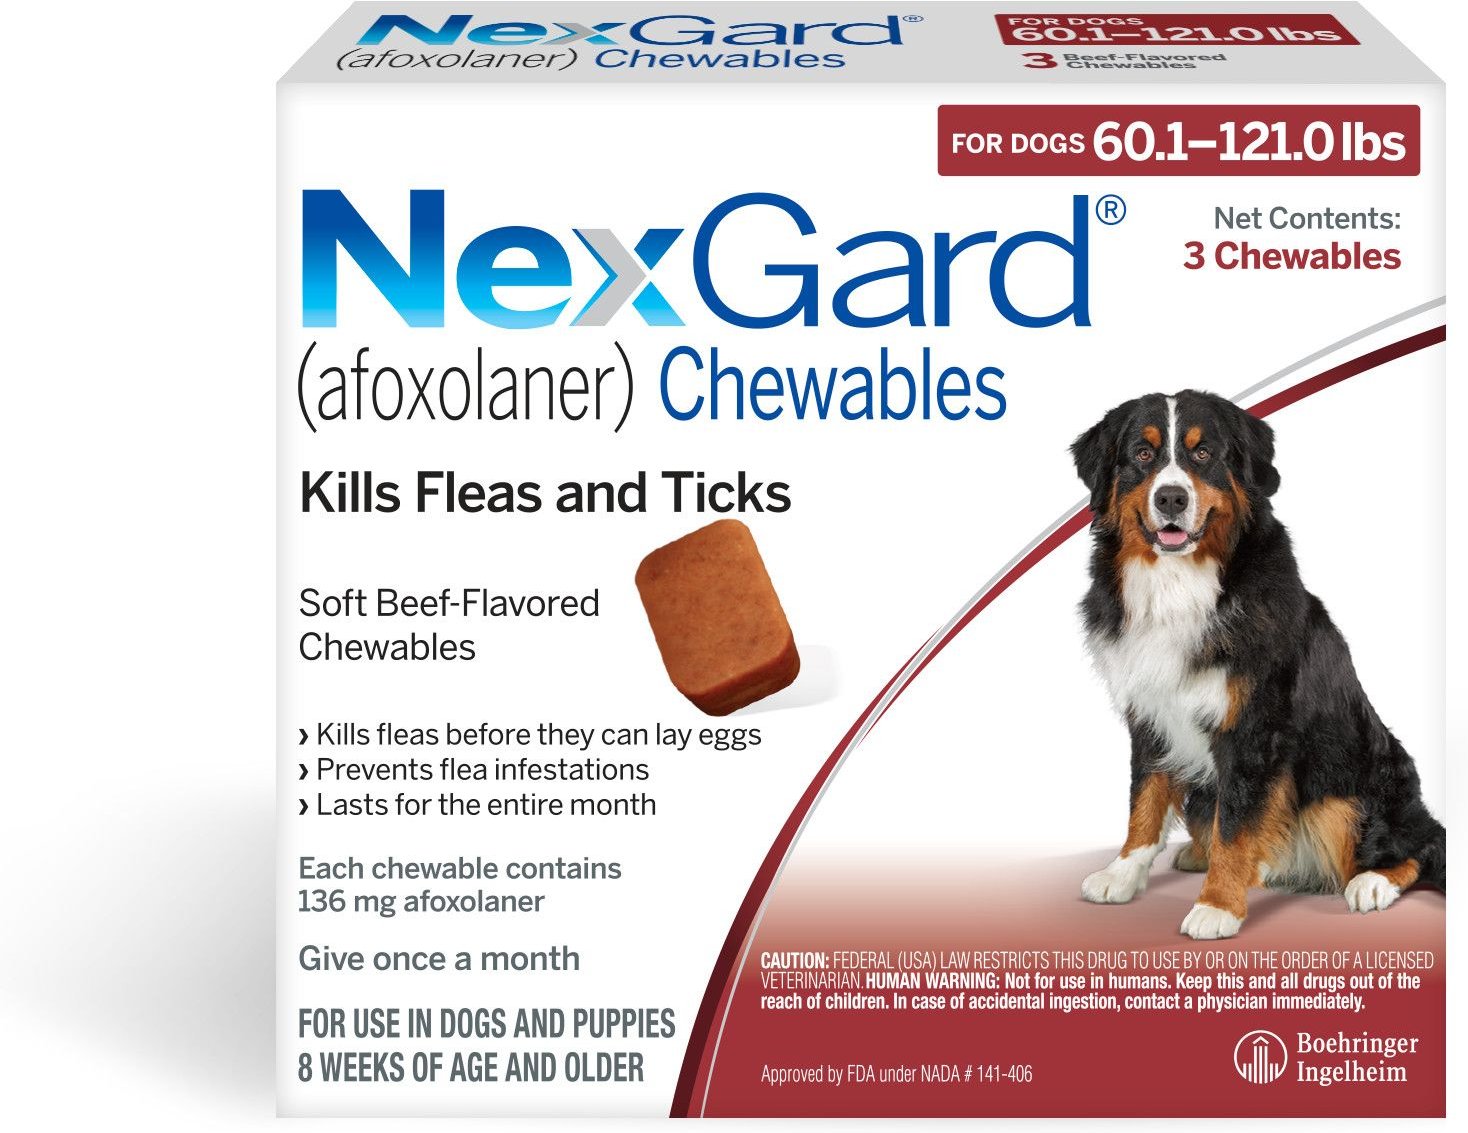 nexgard chewables for small dogs